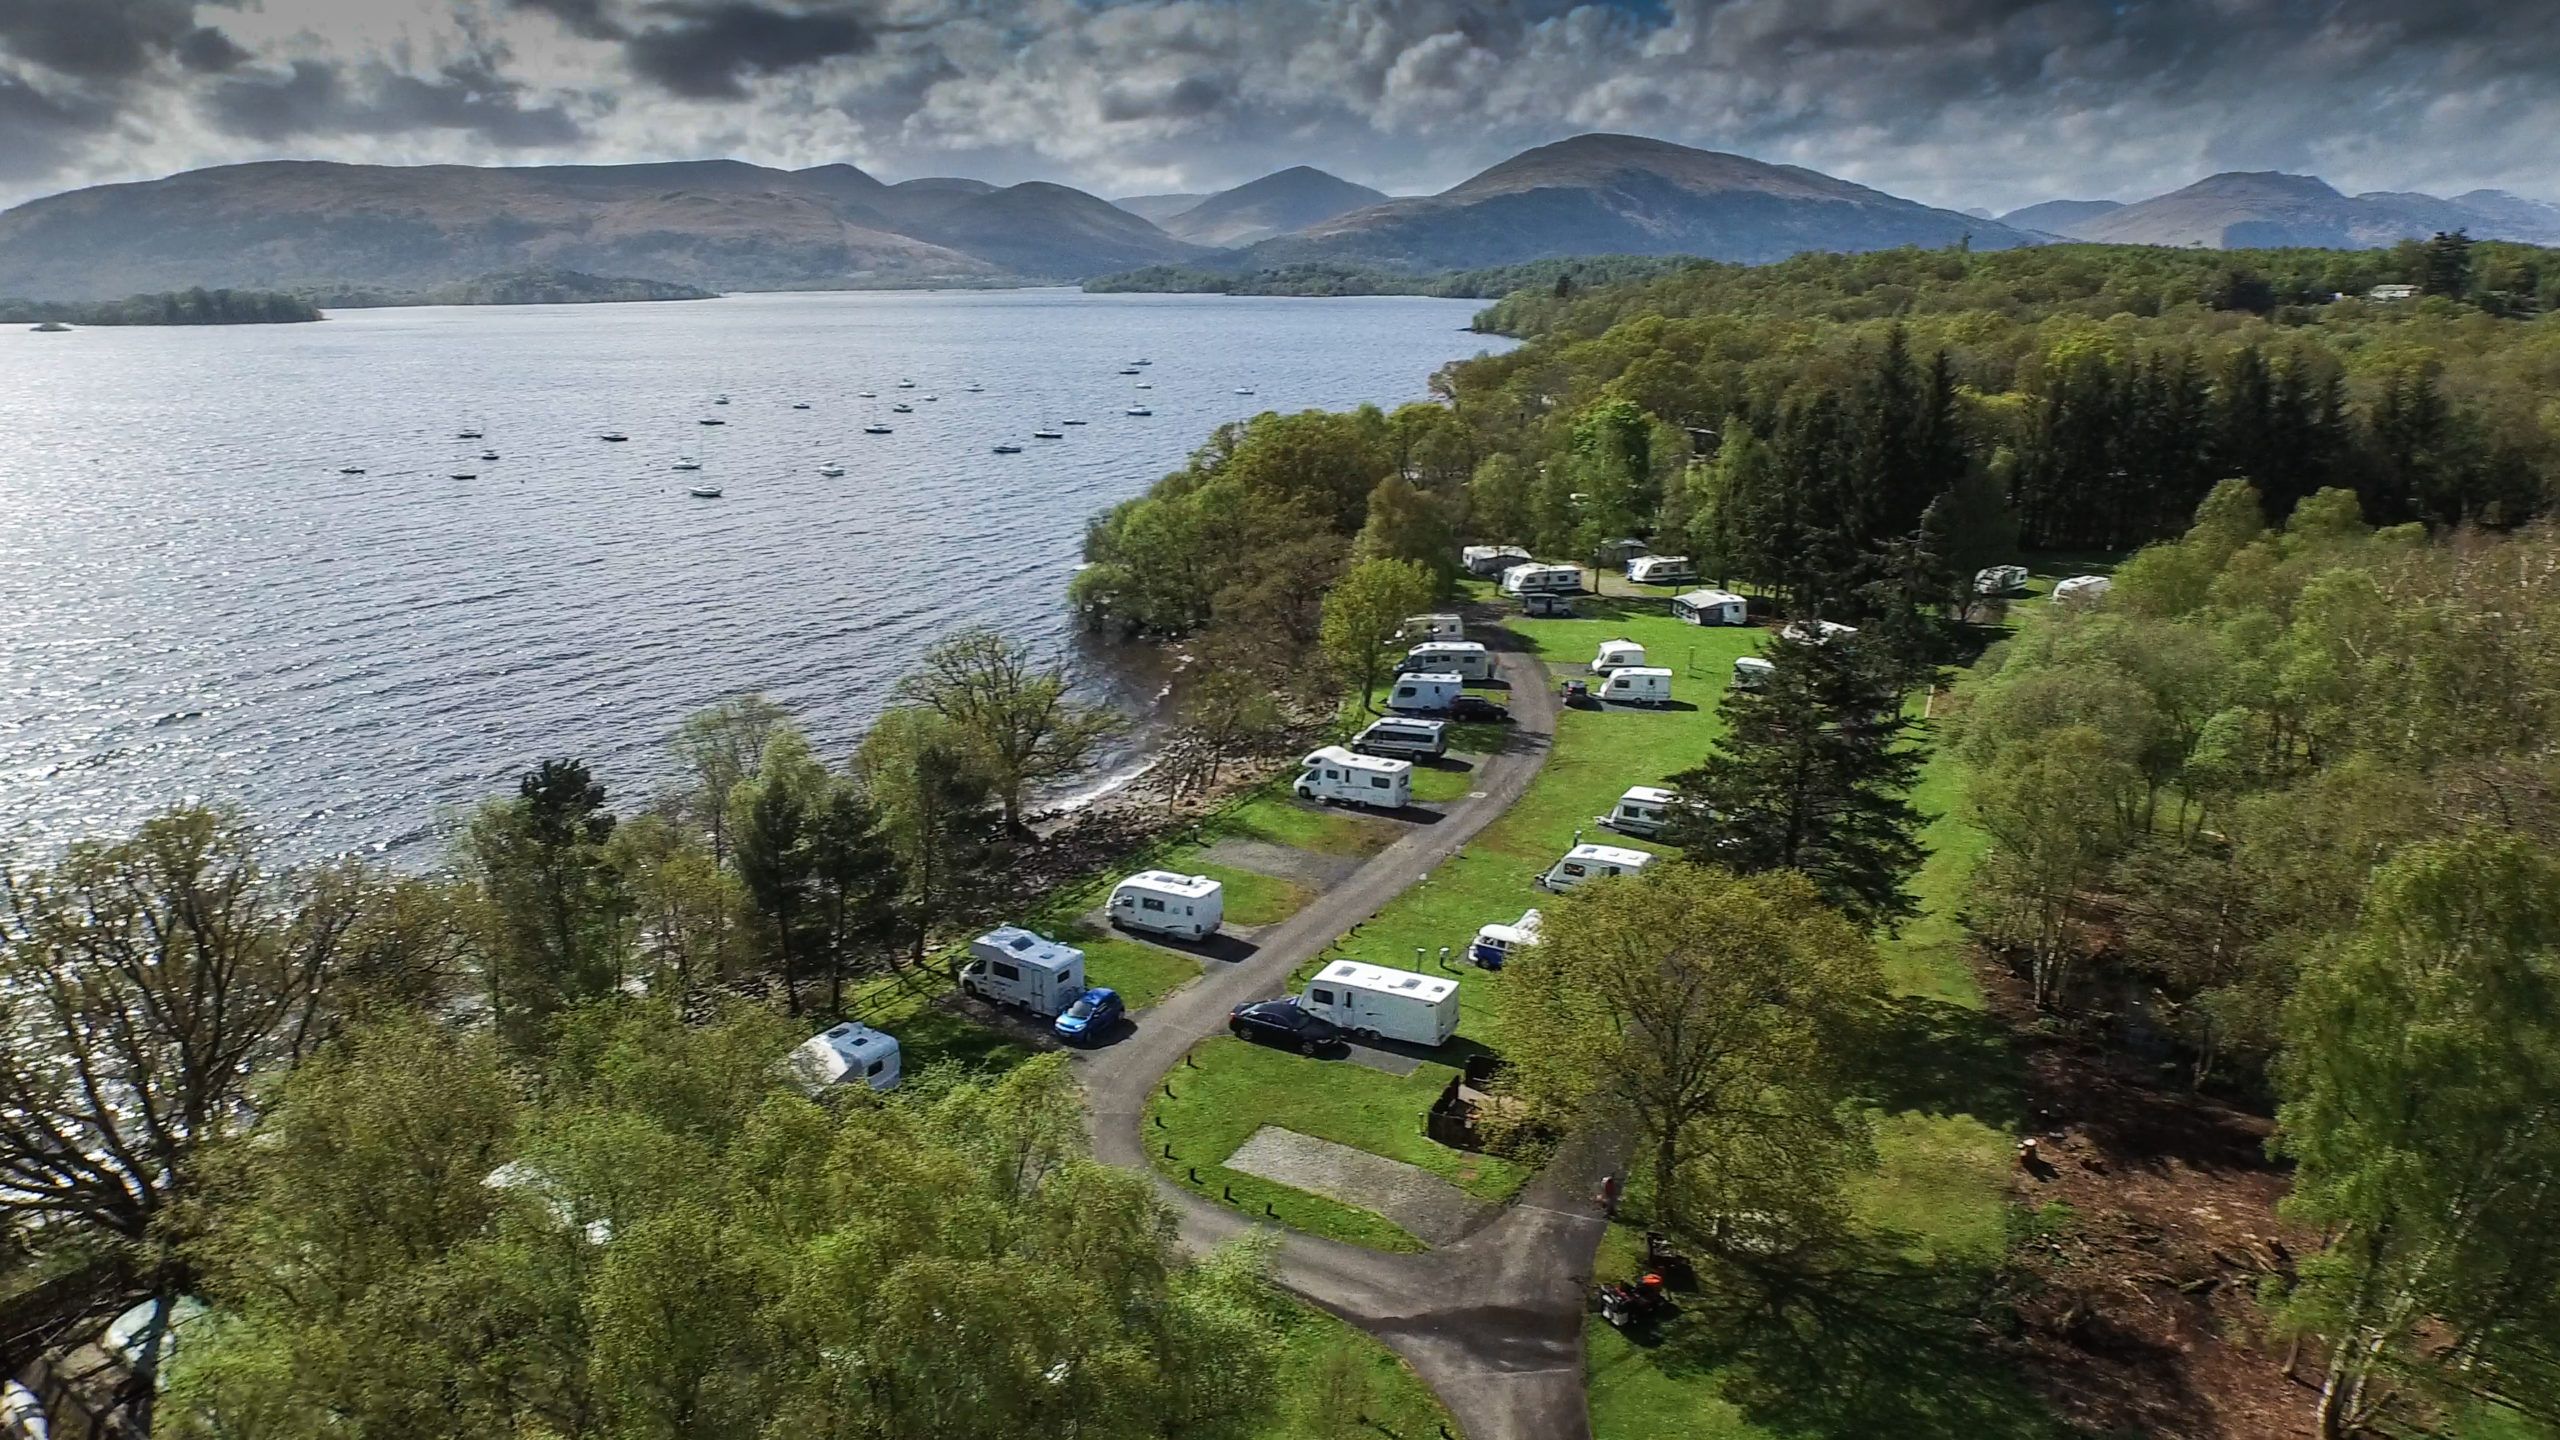 Milarrochy Bay campsite nestles in the Loch Lomond and Trossachs National Park, in the midsts of amazing walks, scenery and wildlife